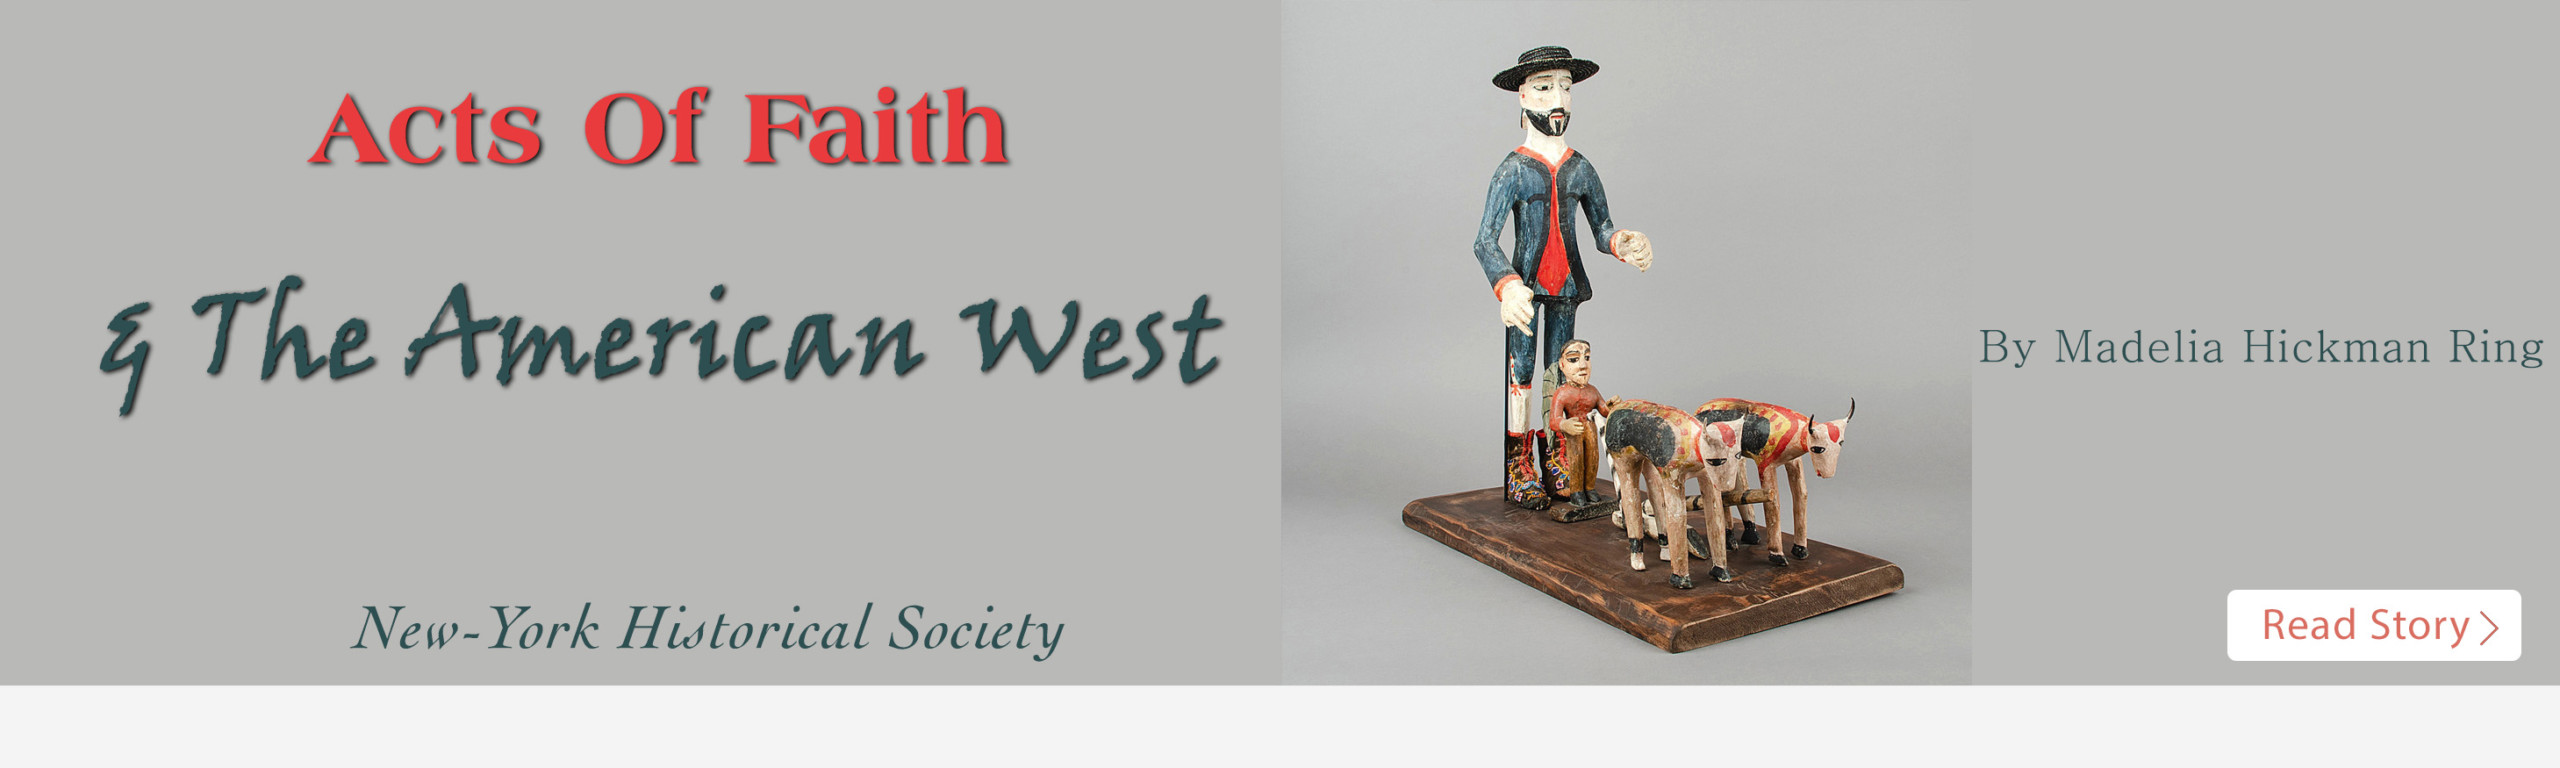 New-York Historical Society—Acts Of Faith & The American West